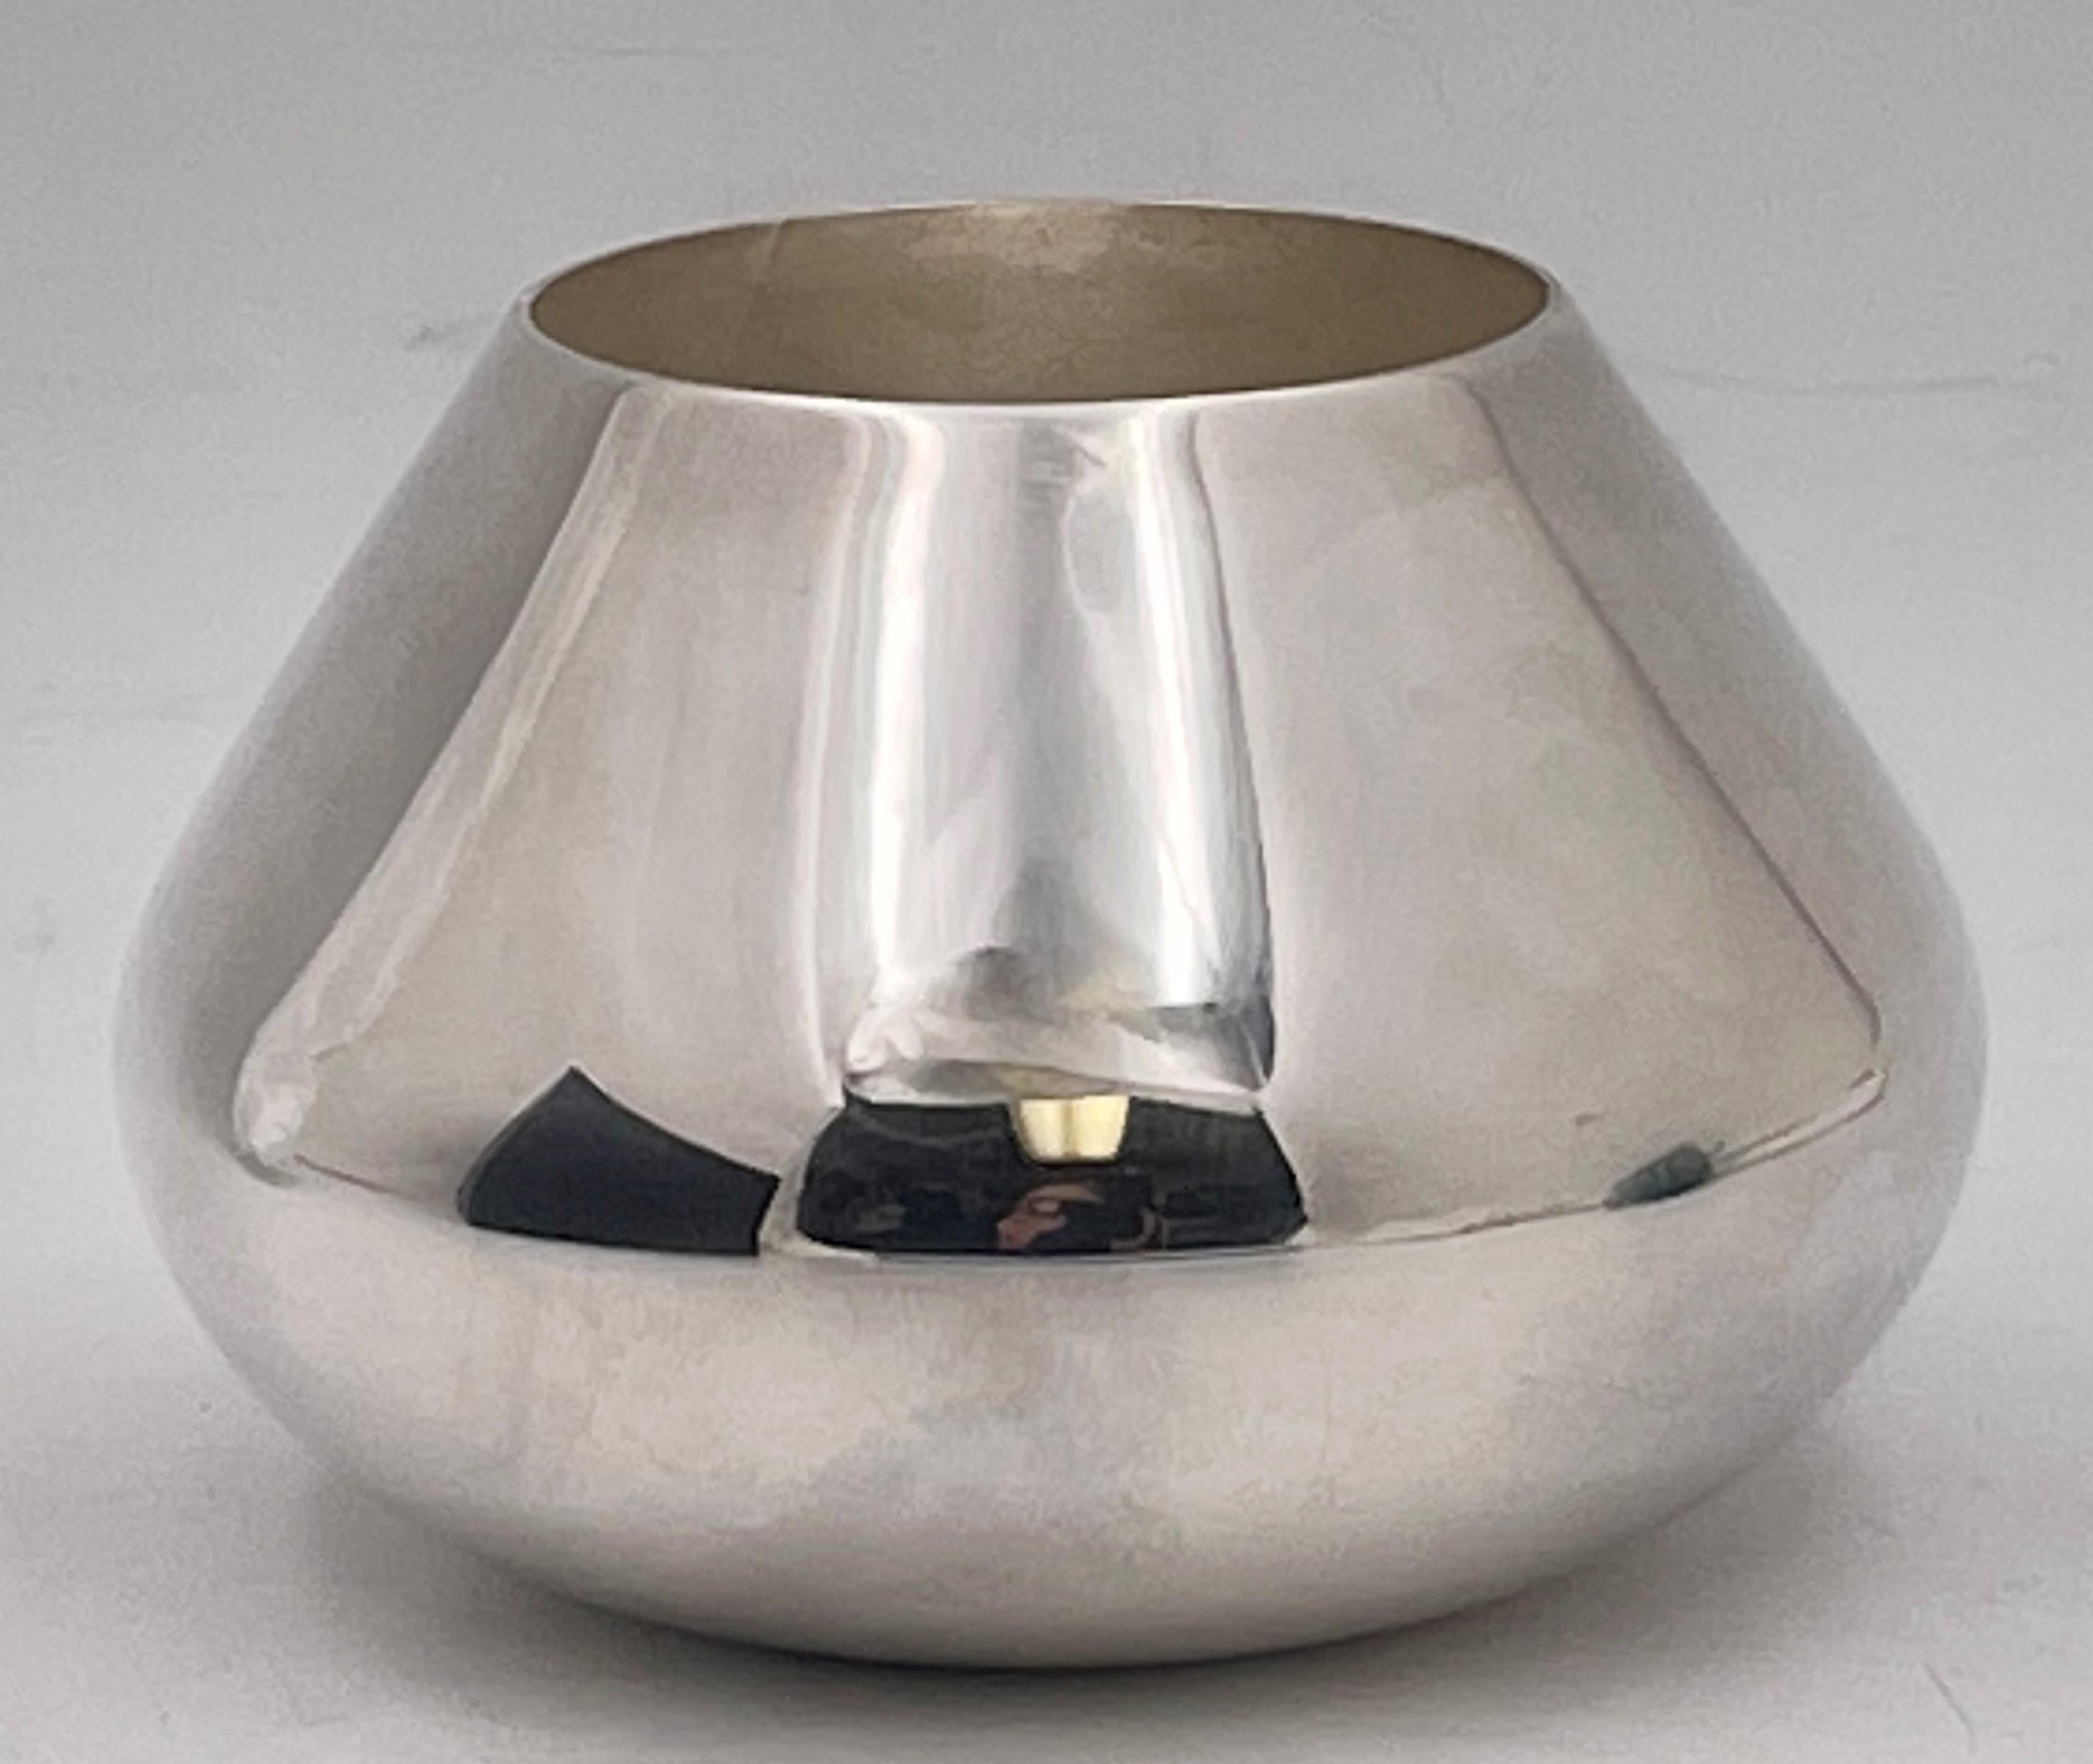 Italian, sterling silver bowl or dish, in Mid-Century Modern Style, with an elegant, geometric design, by Pampaloni. It measures 4 1/2'' in diameter by 5'' in height, is sold in its original packaging, weighs 8.5 troy ounces, and bears hallmarks as